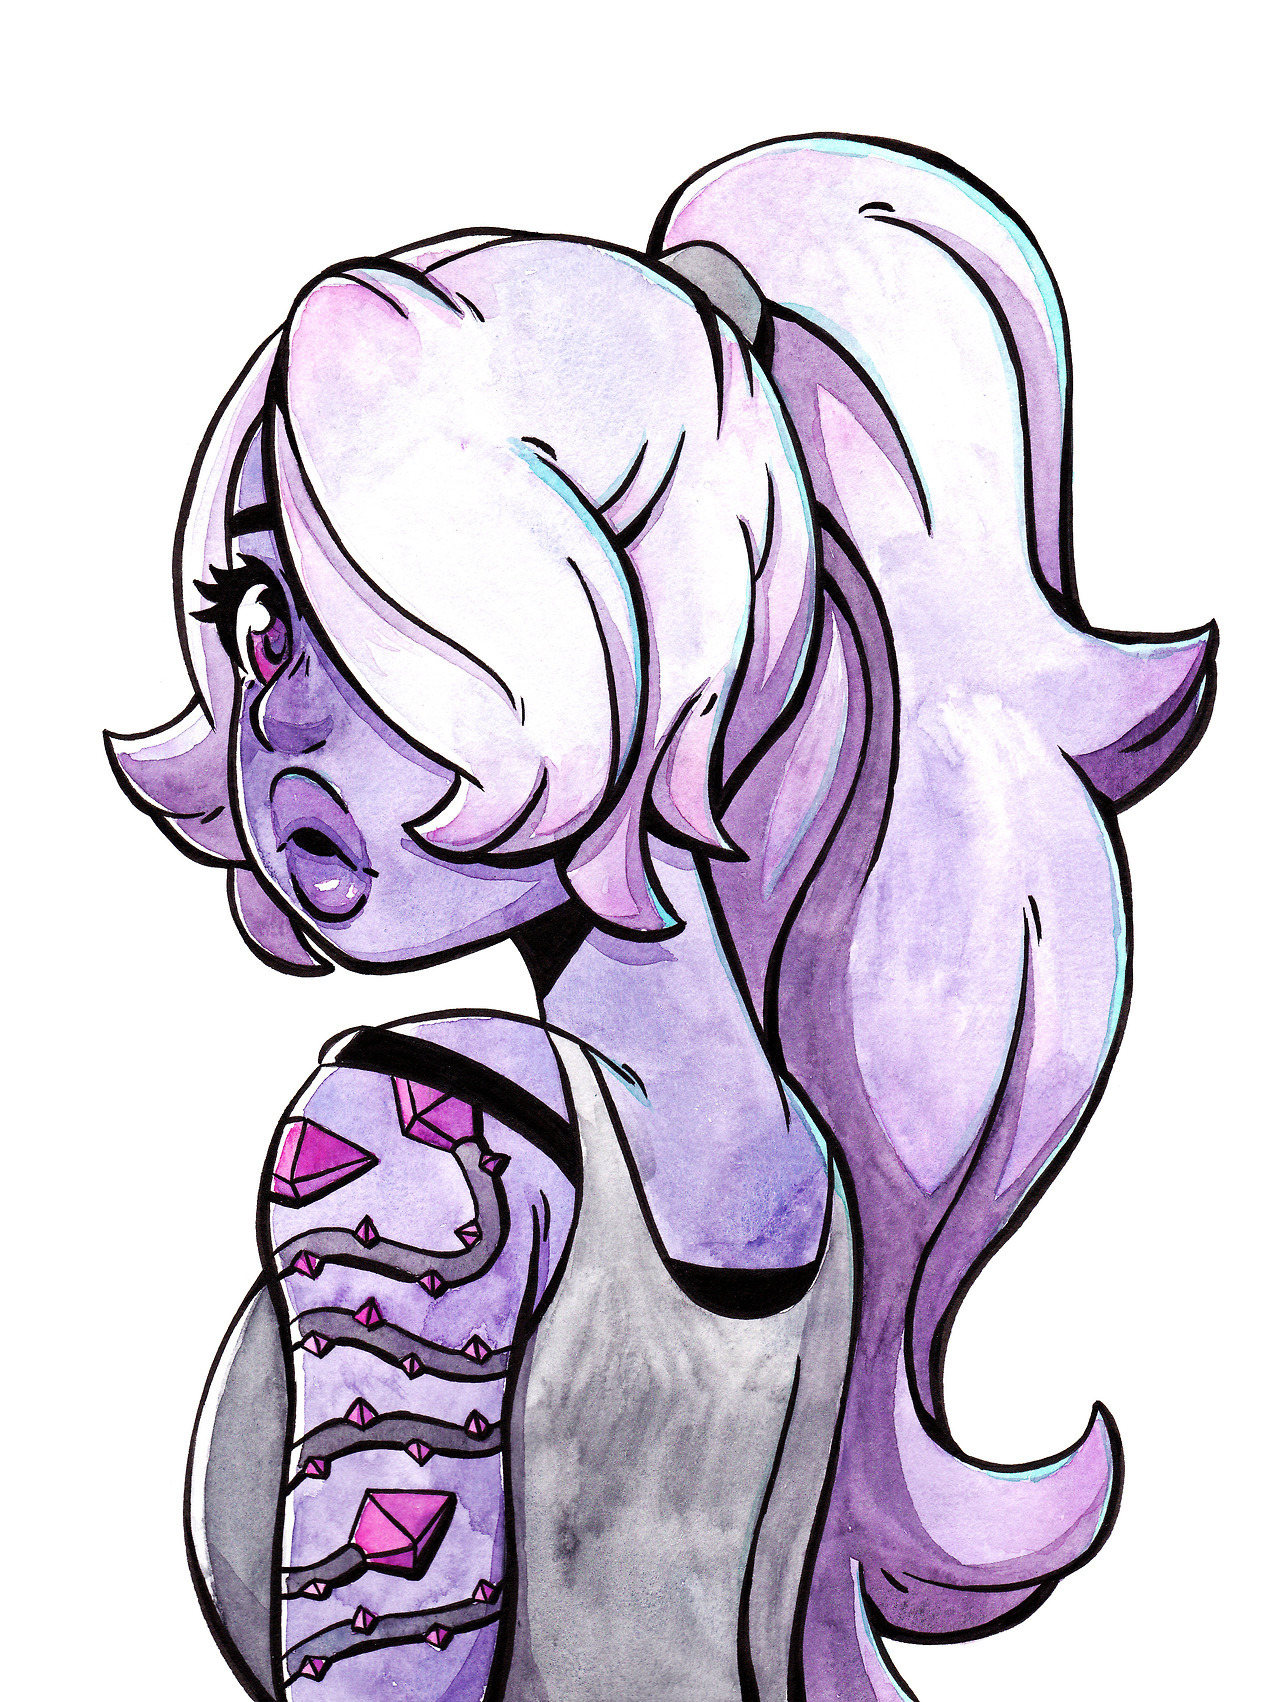 This time it’s Amethyst! I’m not really sure about the whip tattoo, but I posted it anyways… :P (I like making SU fan art when I have no inspiration)